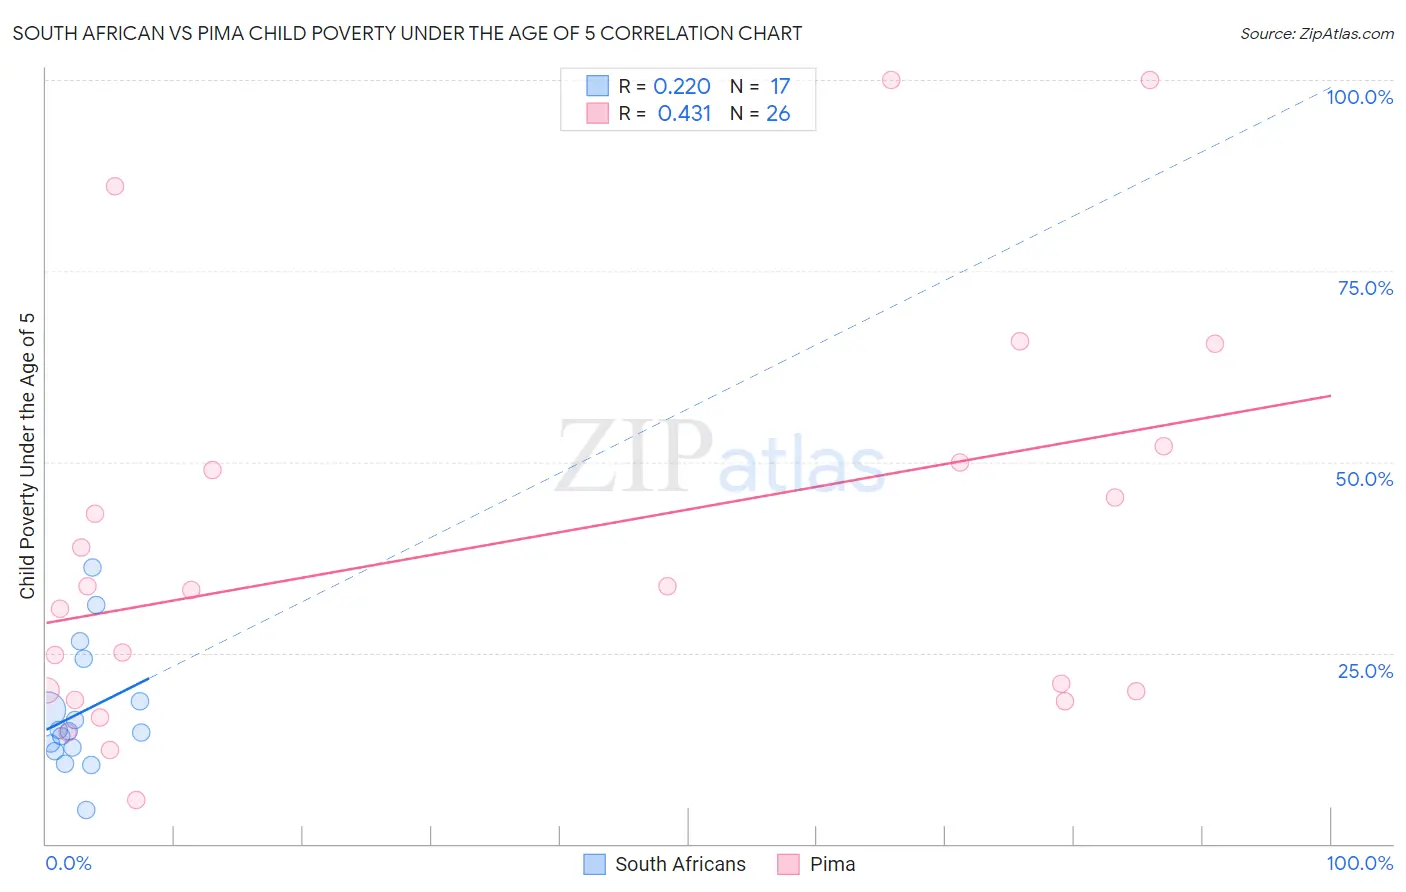 South African vs Pima Child Poverty Under the Age of 5